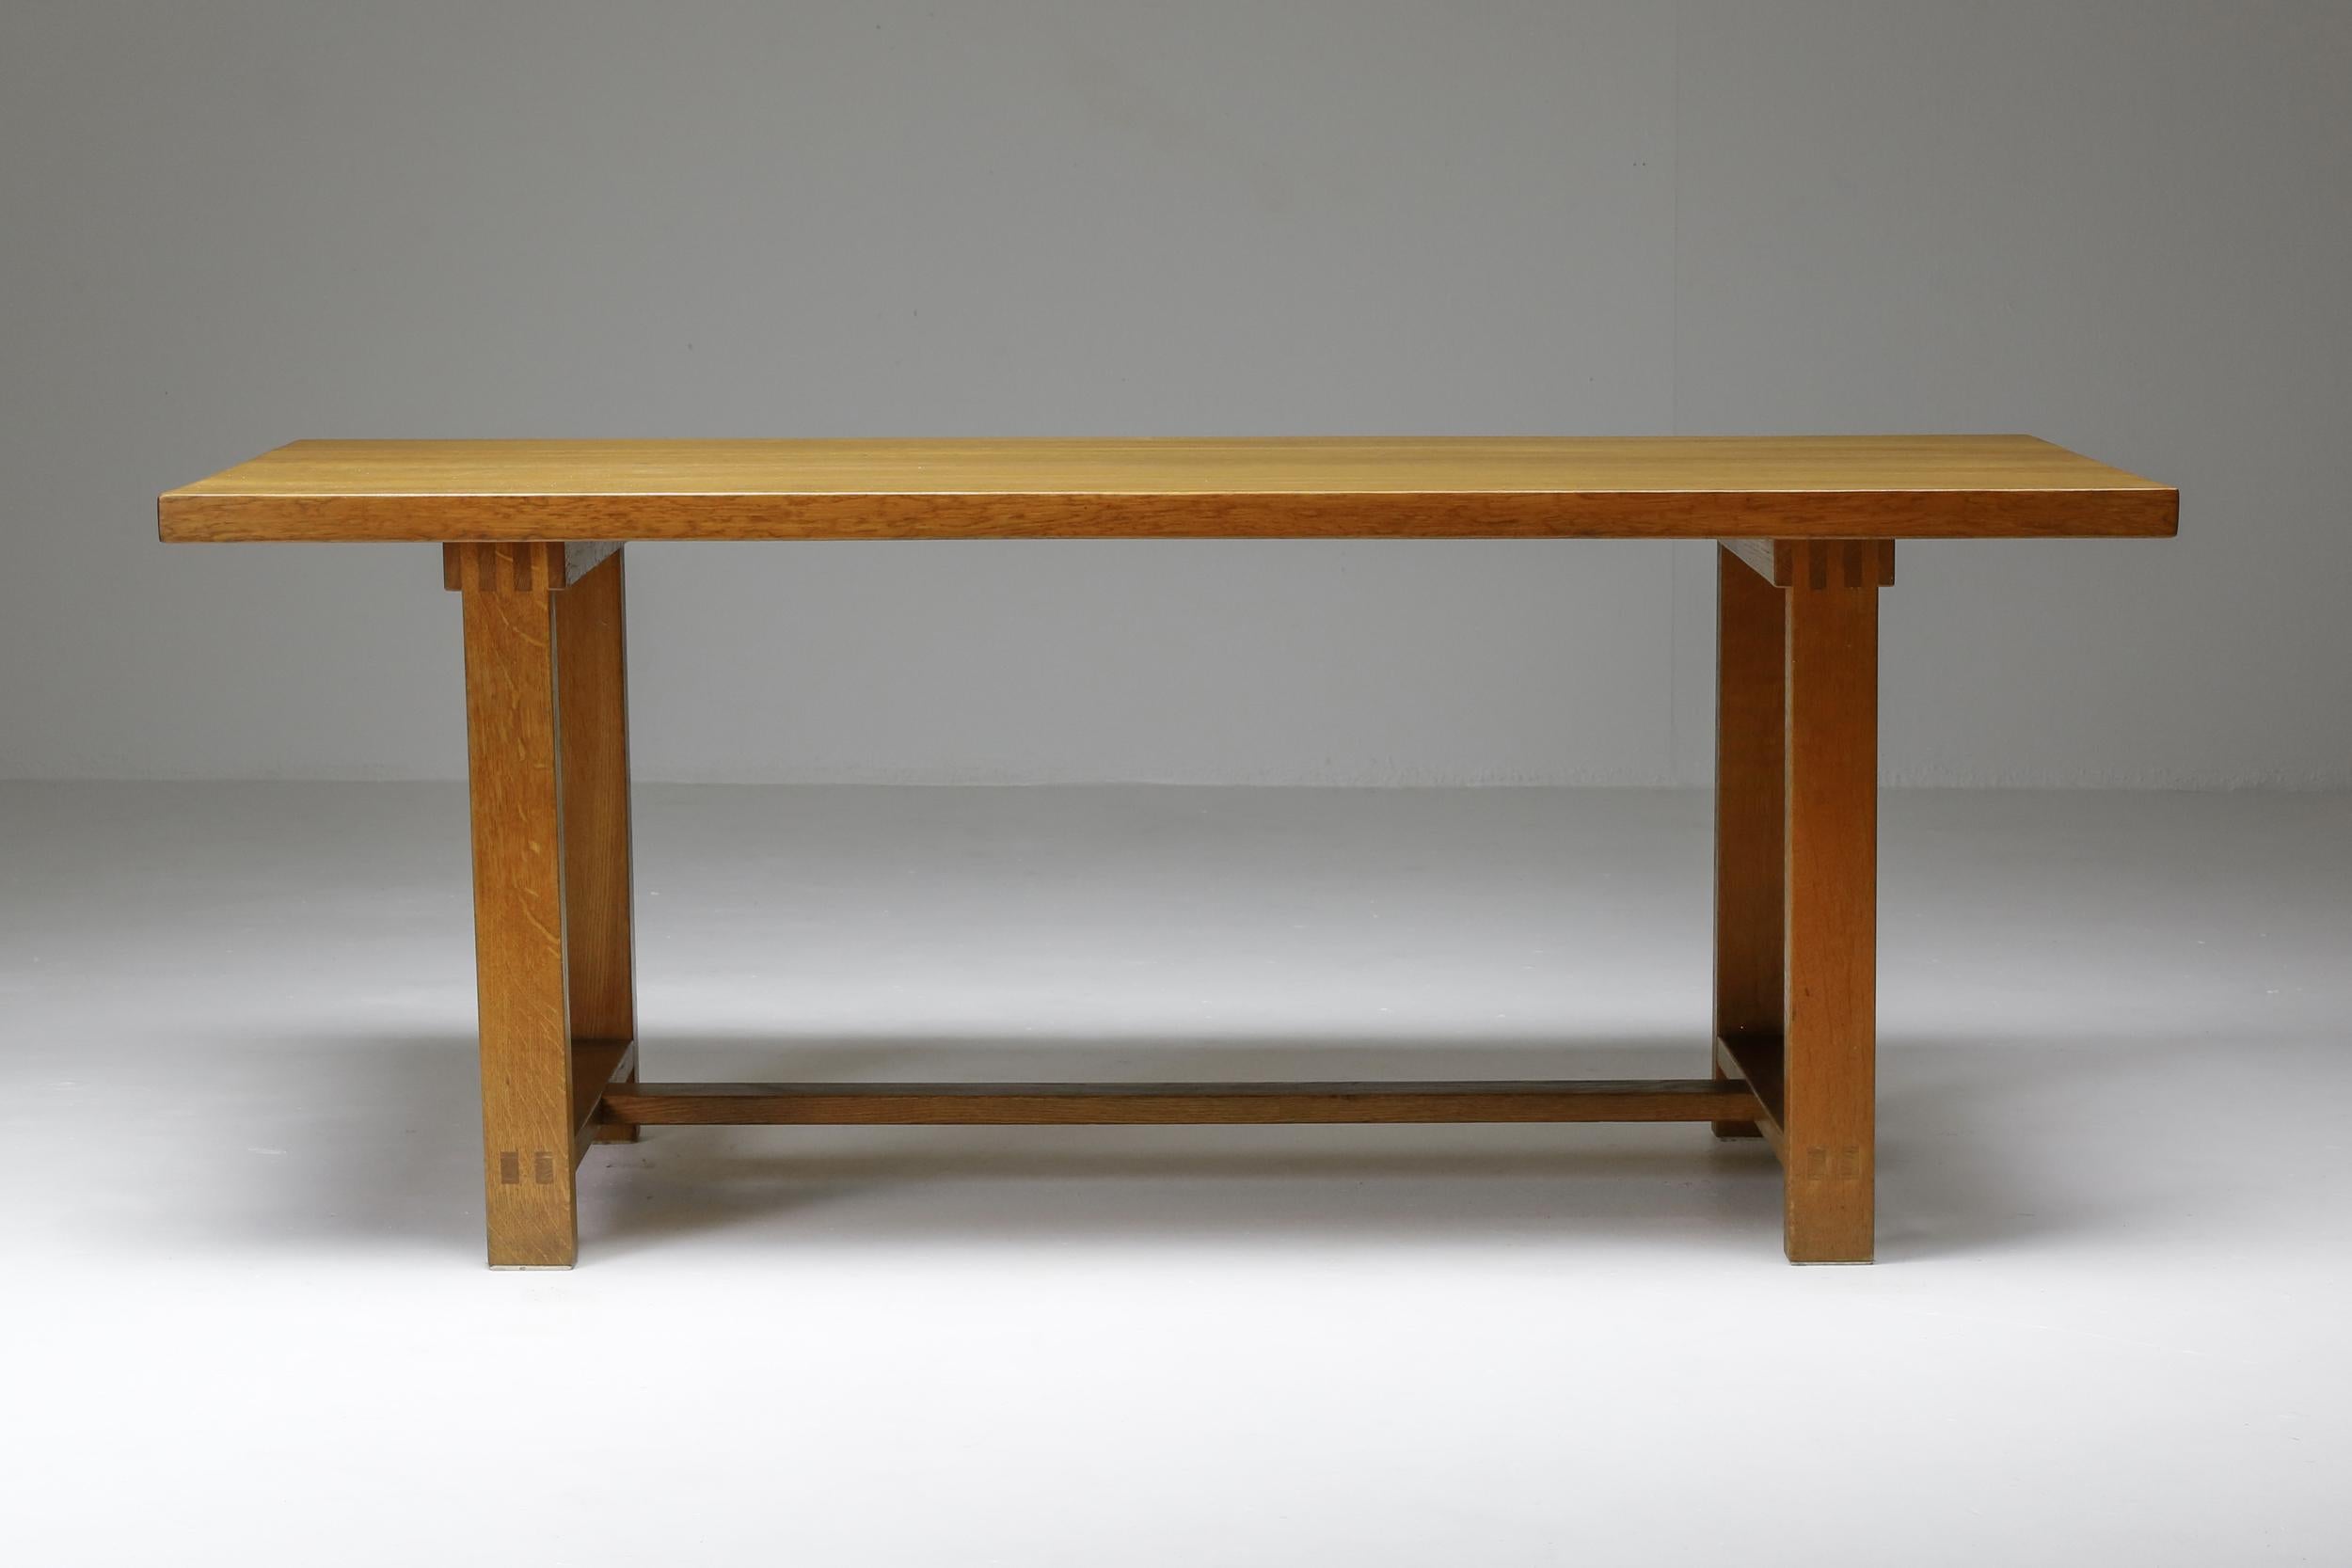 Pierre Chapo, French Design, Dining table, T01D, Mid-Century Modern, elm, France

This table is a rare find when It comes to Pierre Chapo's legacy of designs.
With its elegant functional form, the table invites you to be a part of the